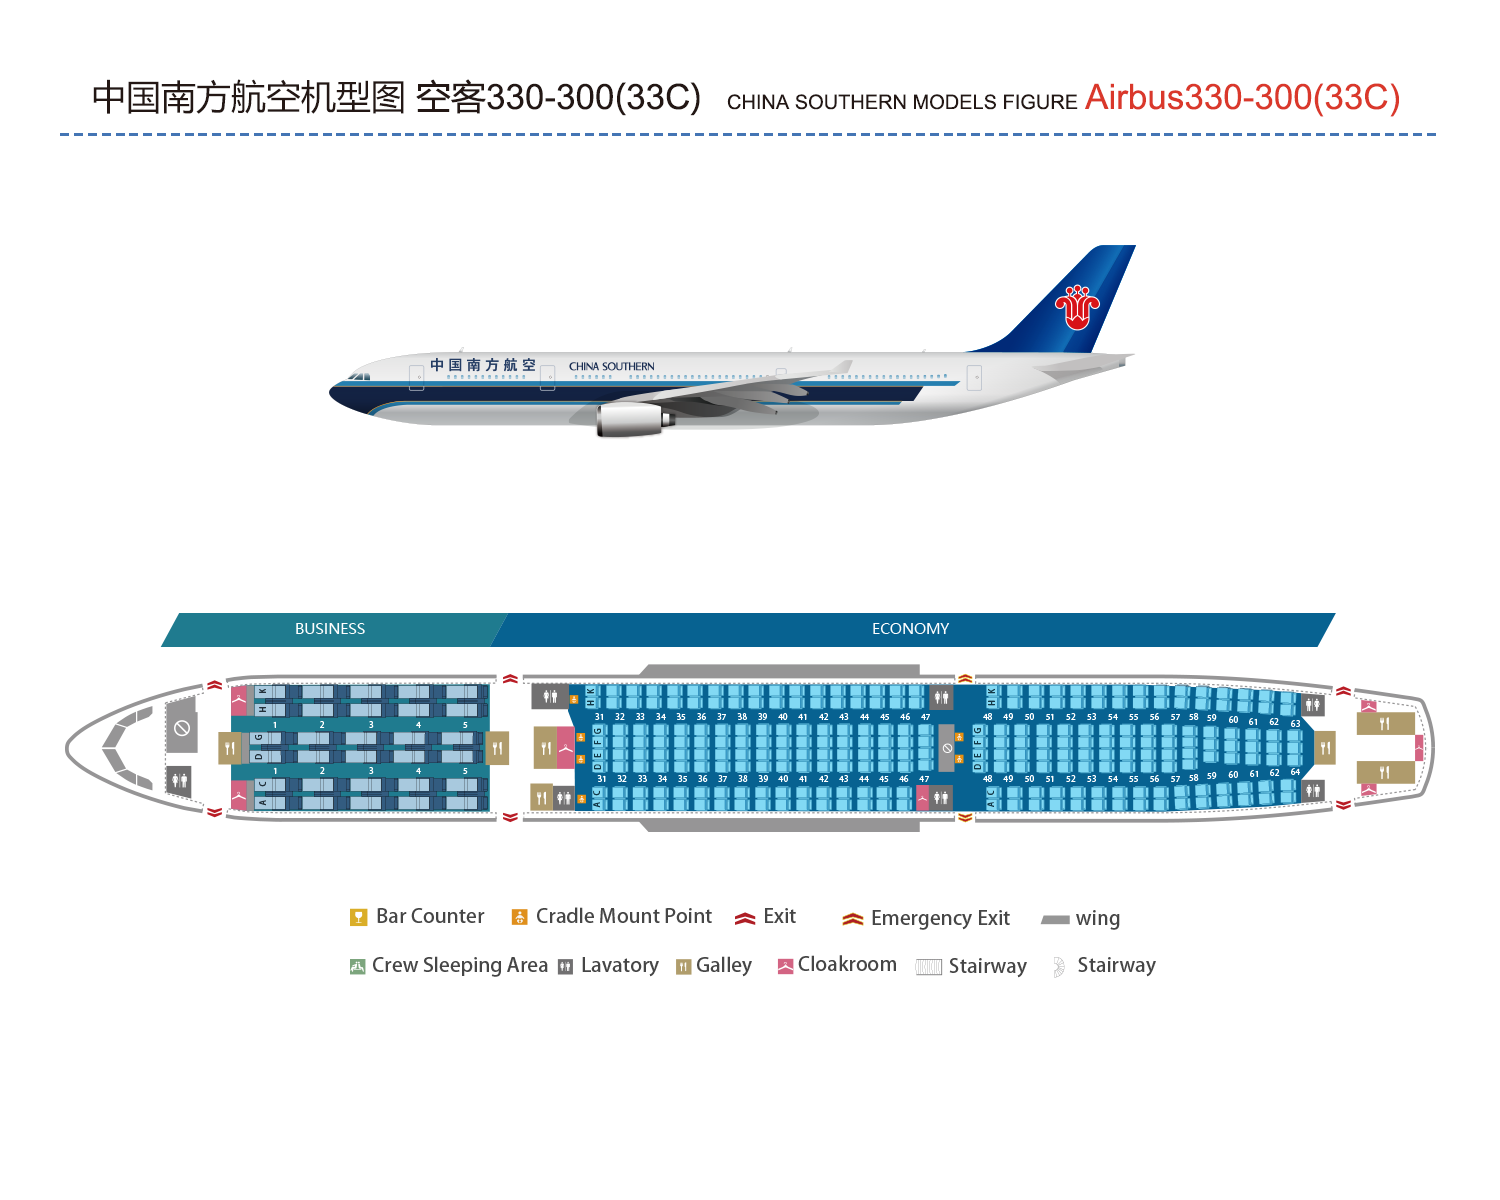 Cabin plan of our Airbus A330-300